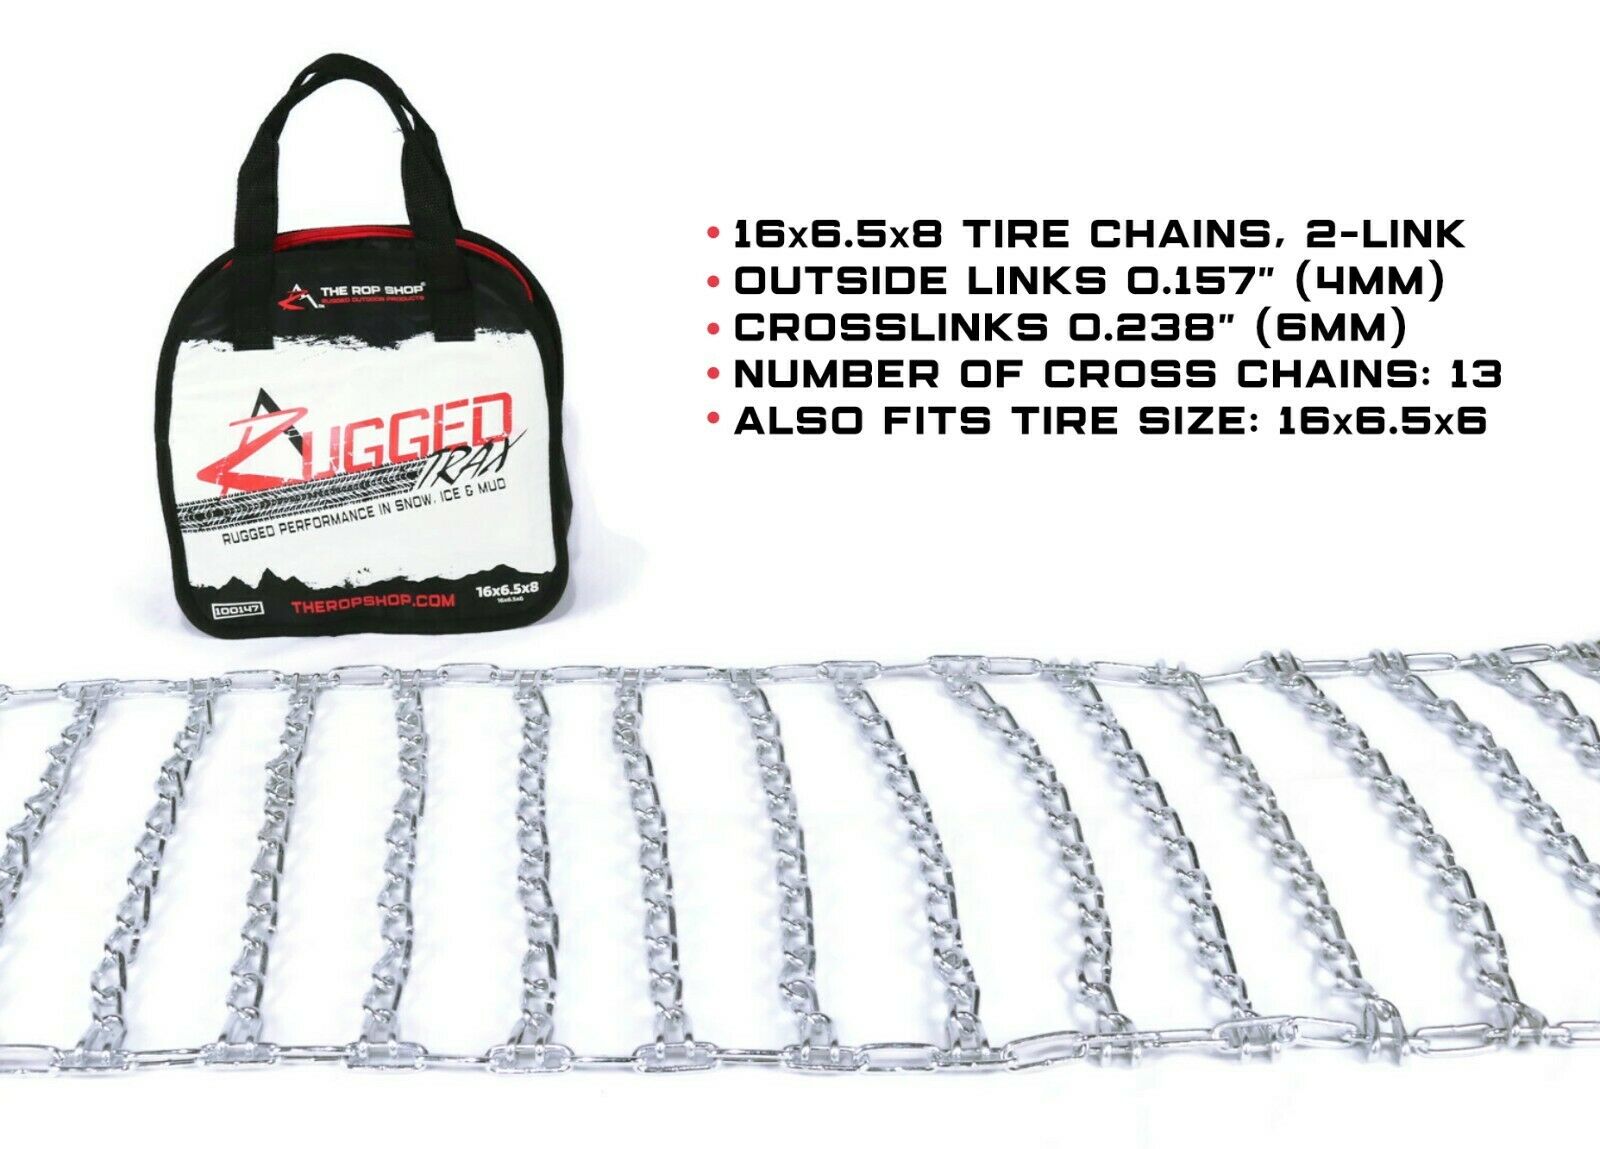 The ROP Shop | Pair of 2 Link Tire Chains 16x6.5x8 For Cub Cadet LawnMower, Snowblower, Thrower - image 2 of 6